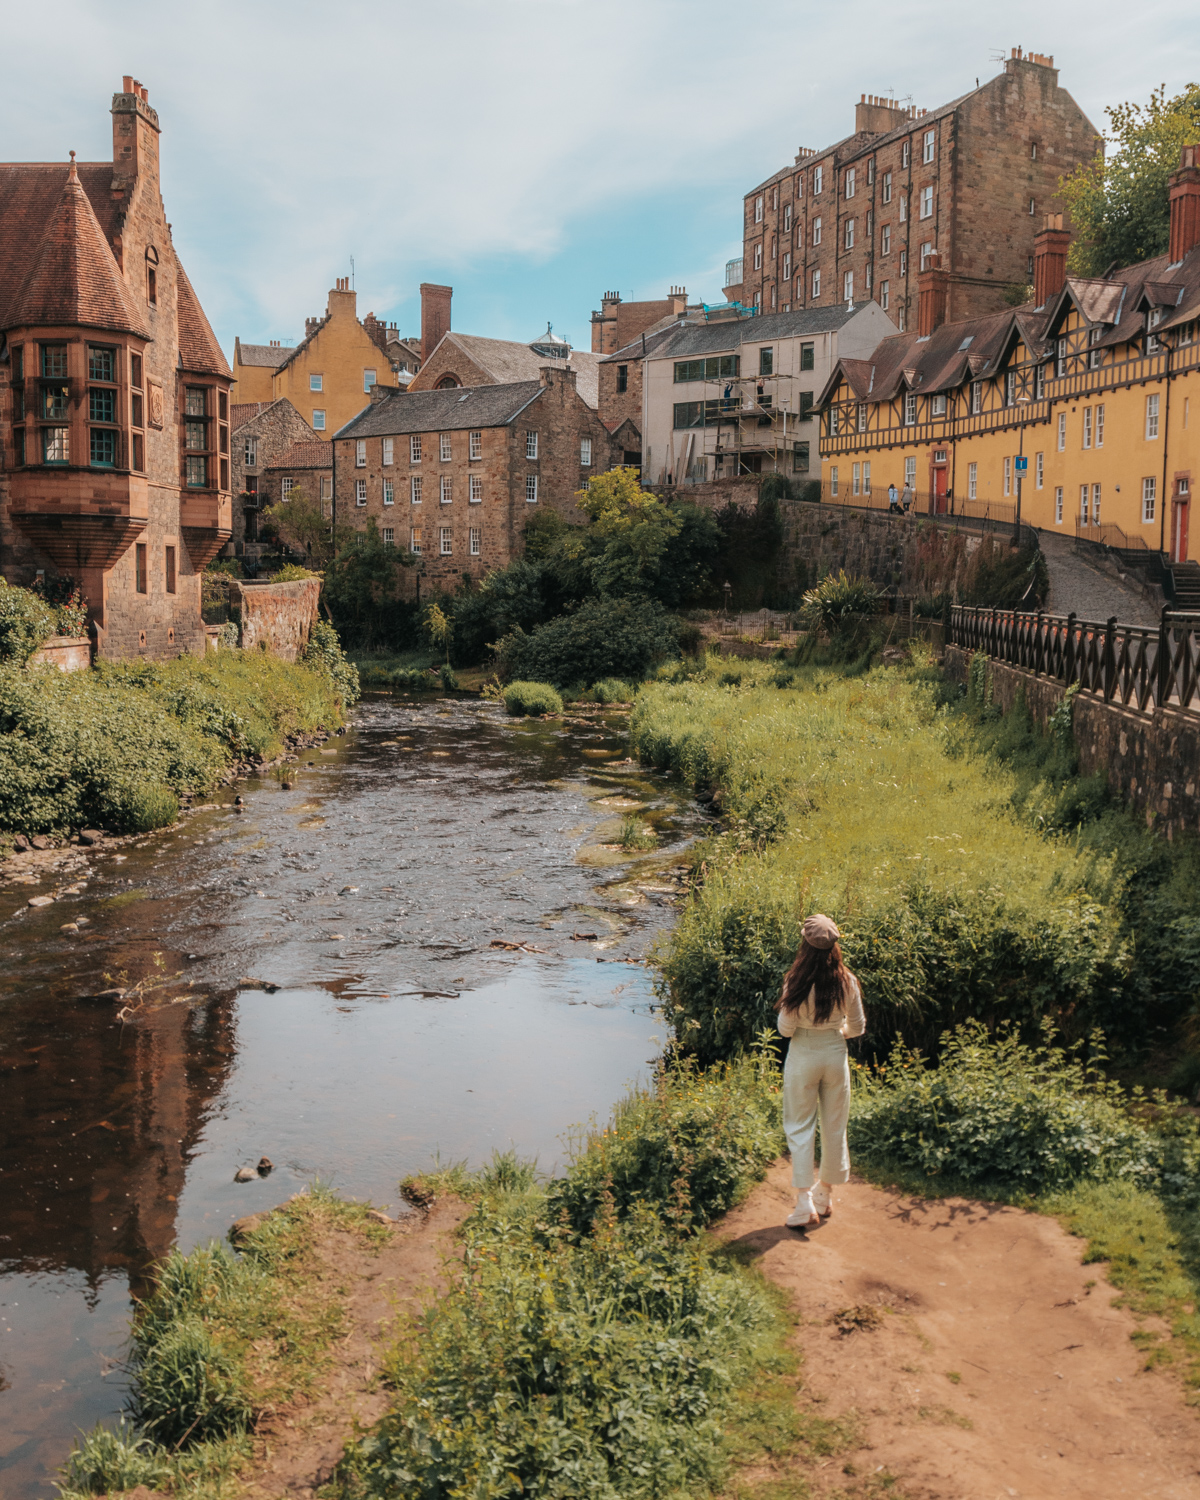 Girl standing at edge of river in front of medieval buildings - Dean Village in Edinburgh, Scotland